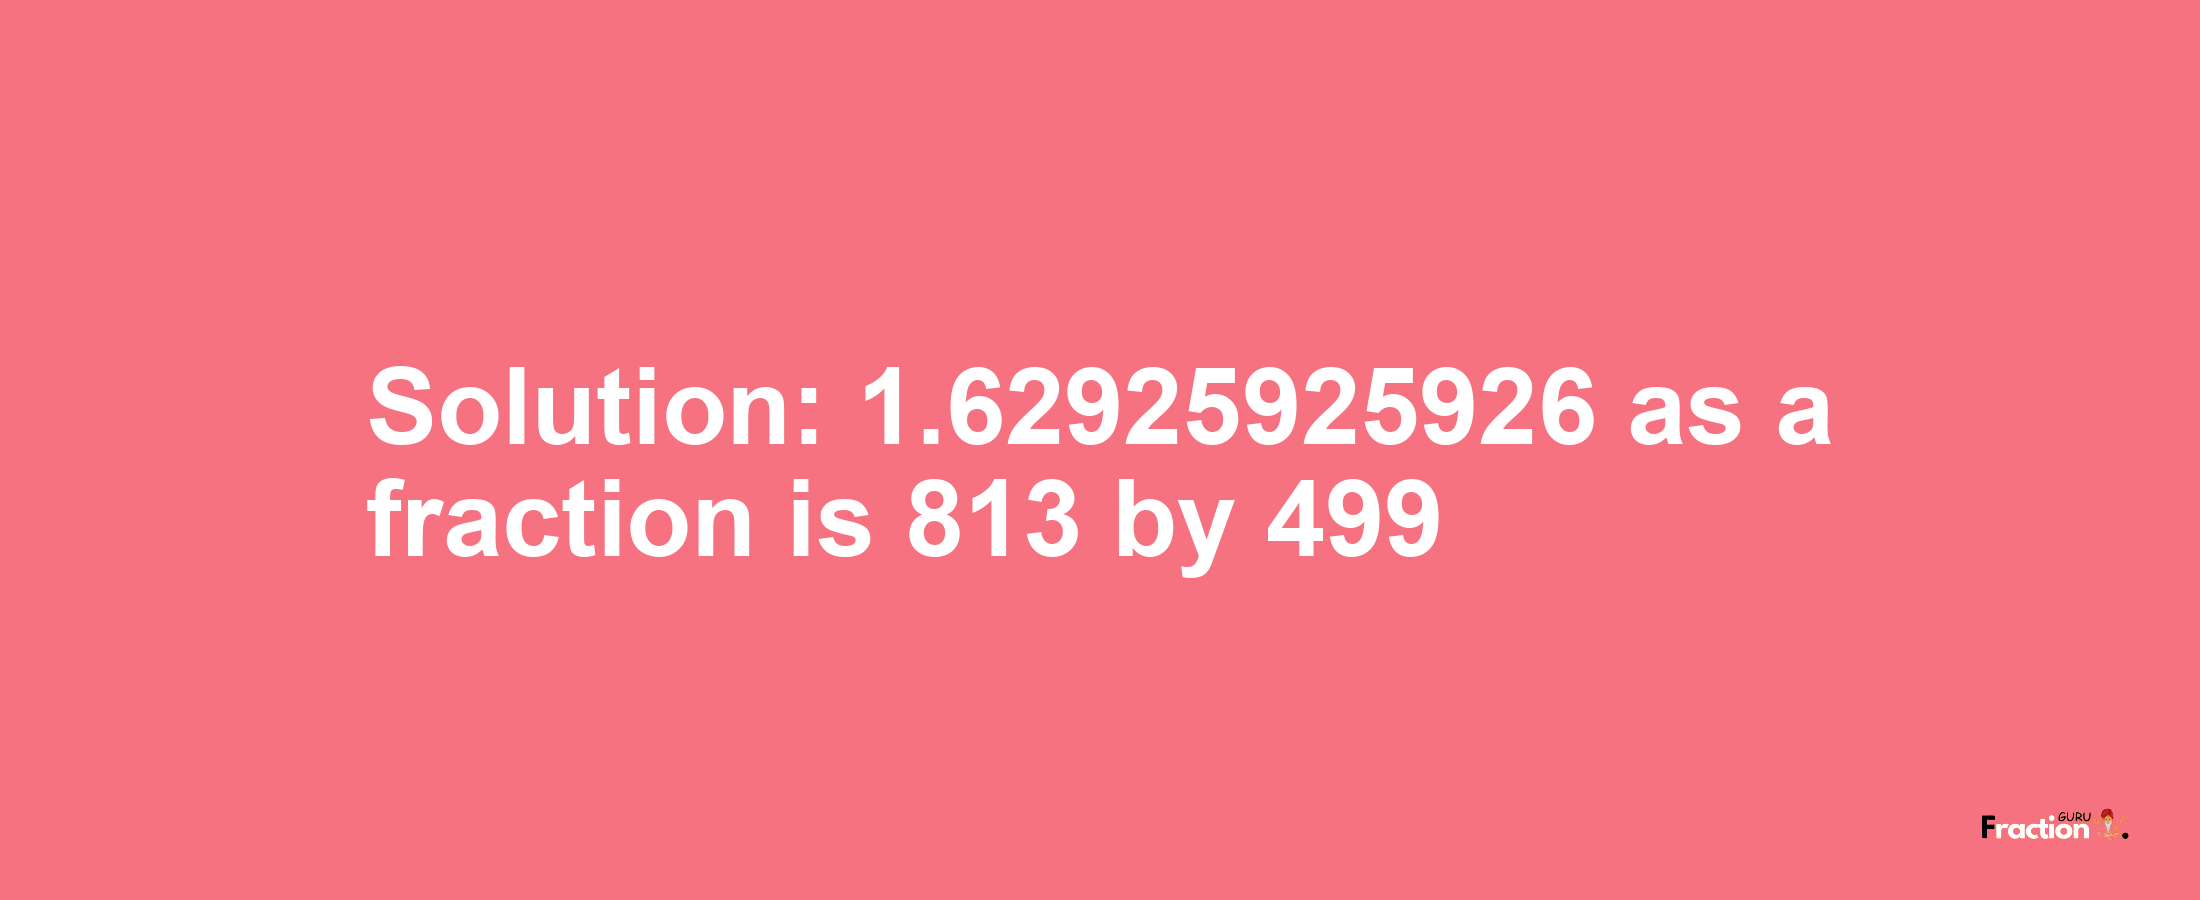 Solution:1.62925925926 as a fraction is 813/499